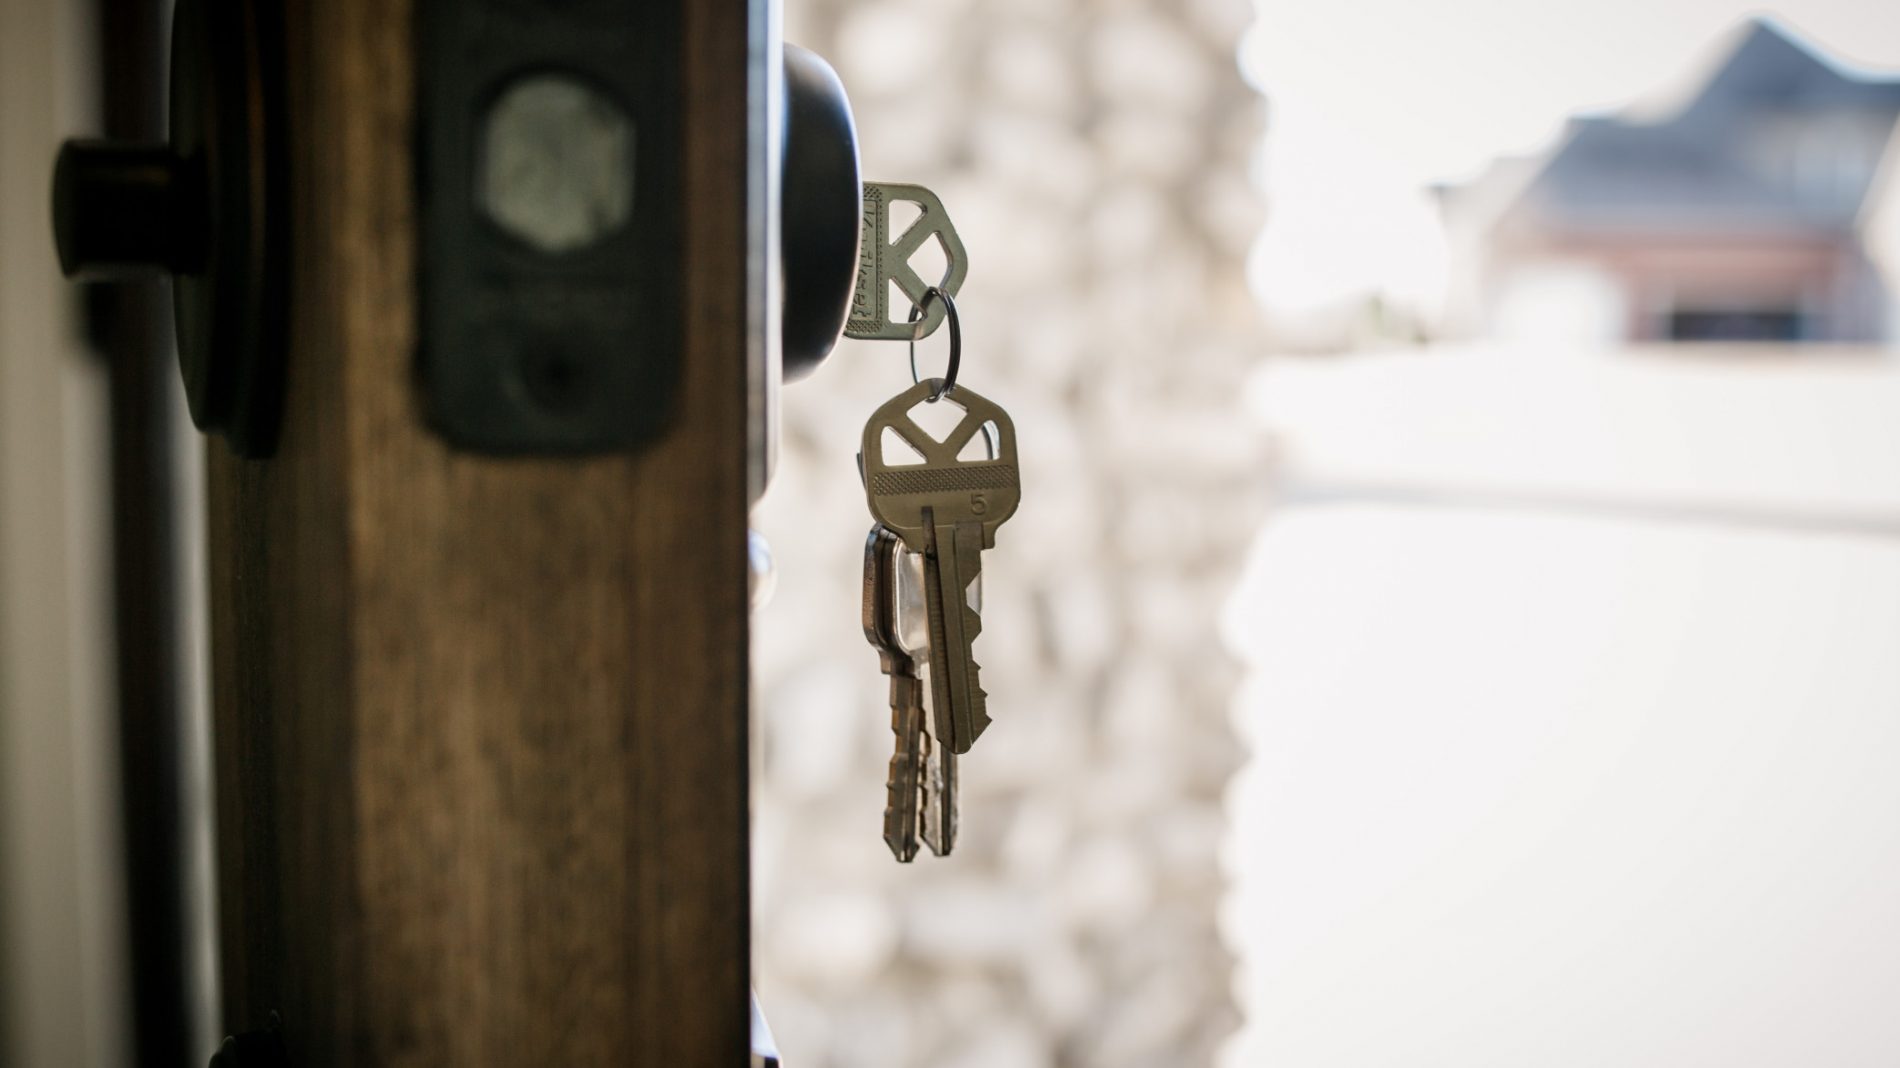 A set of keys hanging from a door - eviction